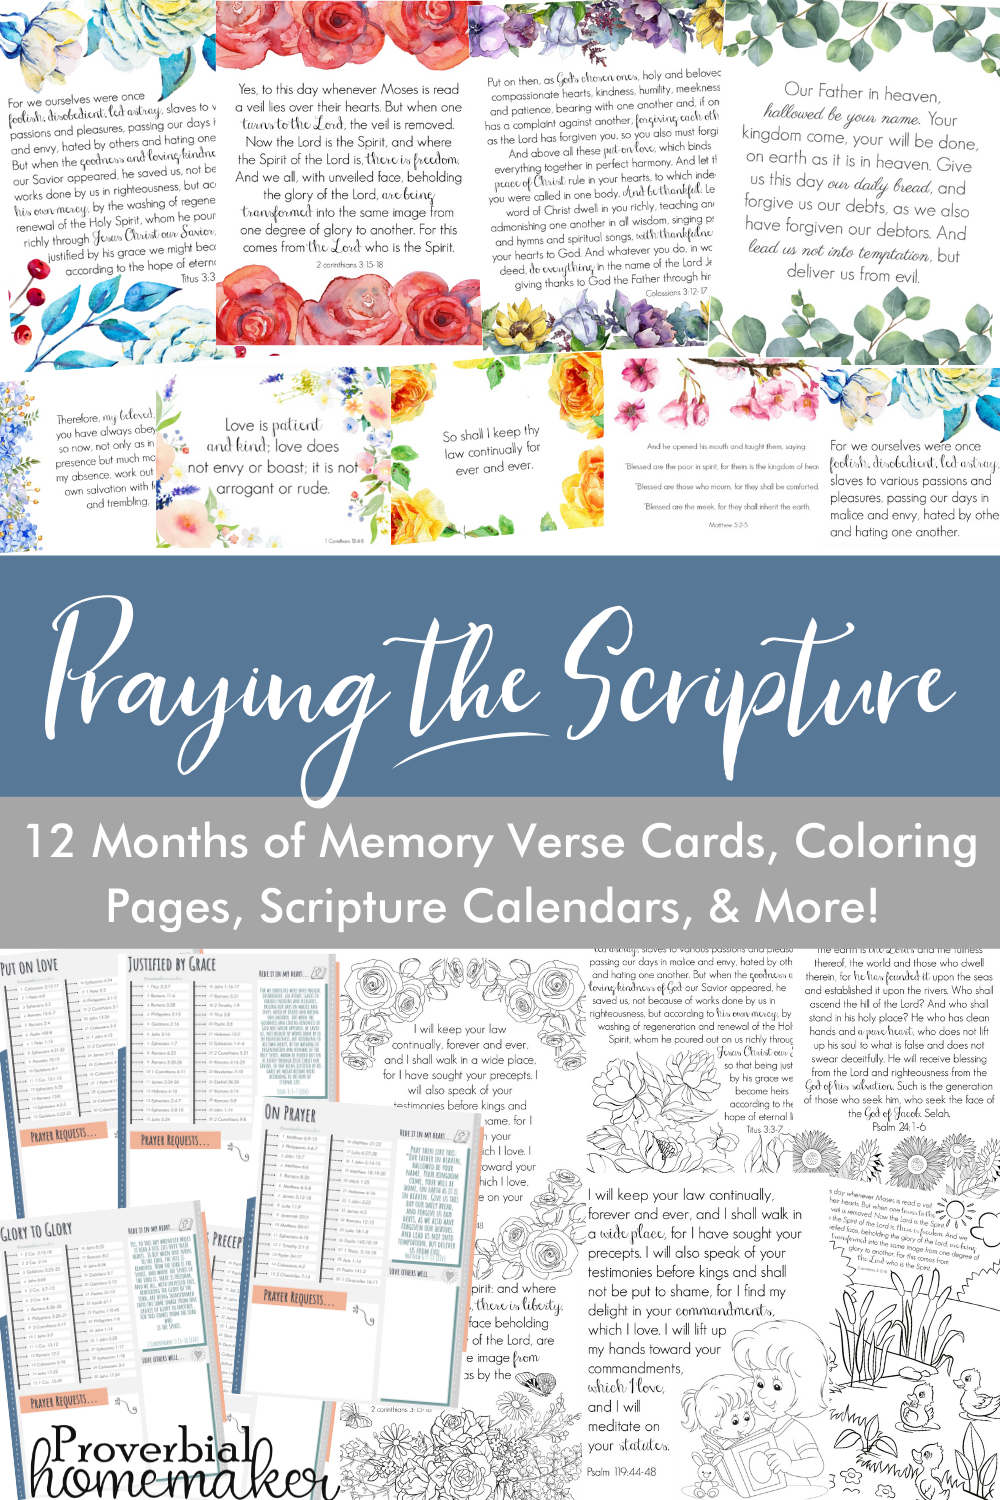 1 Year of Praying the Scripture